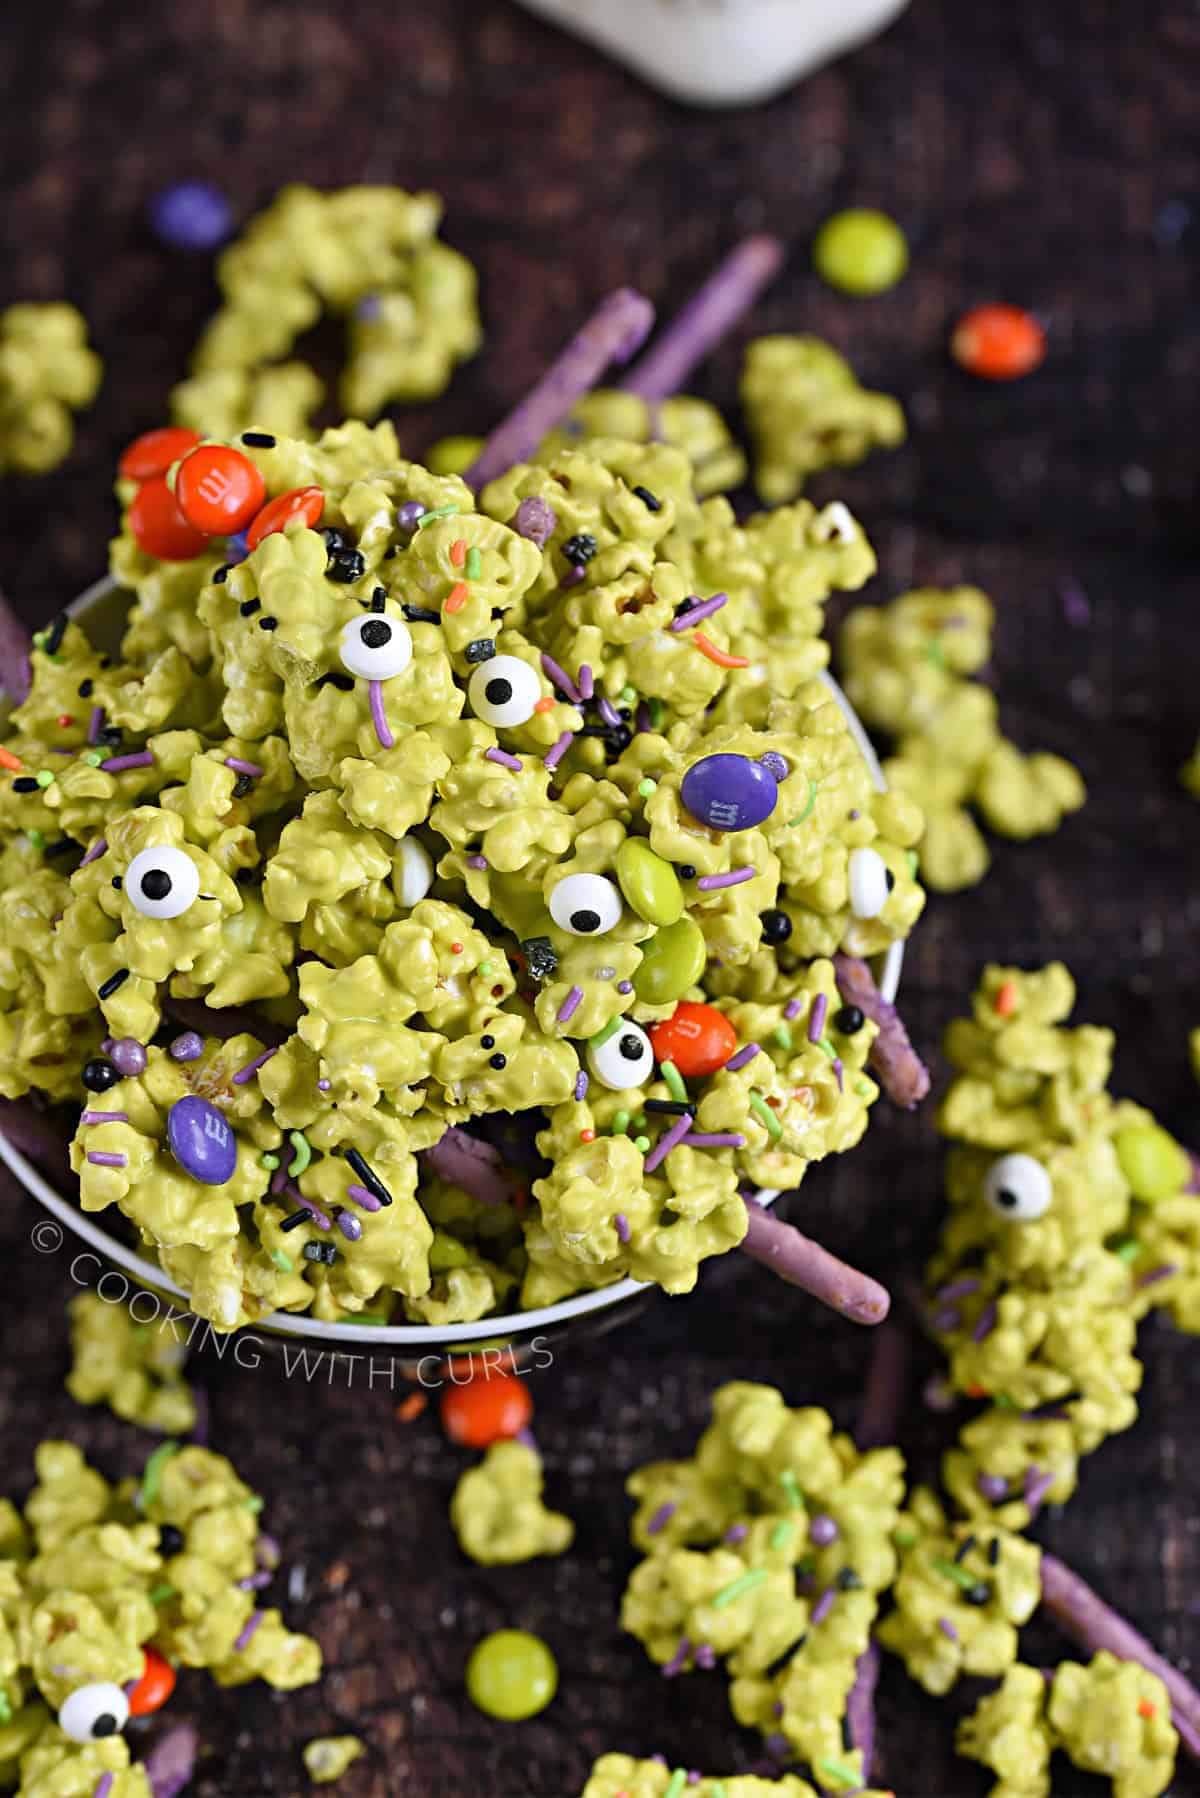 A-bowl-overflowing-with-green-candy-coated-popcorn-sprinkles-purple-pretzel-sticks-and-candy-coated-chocolates.